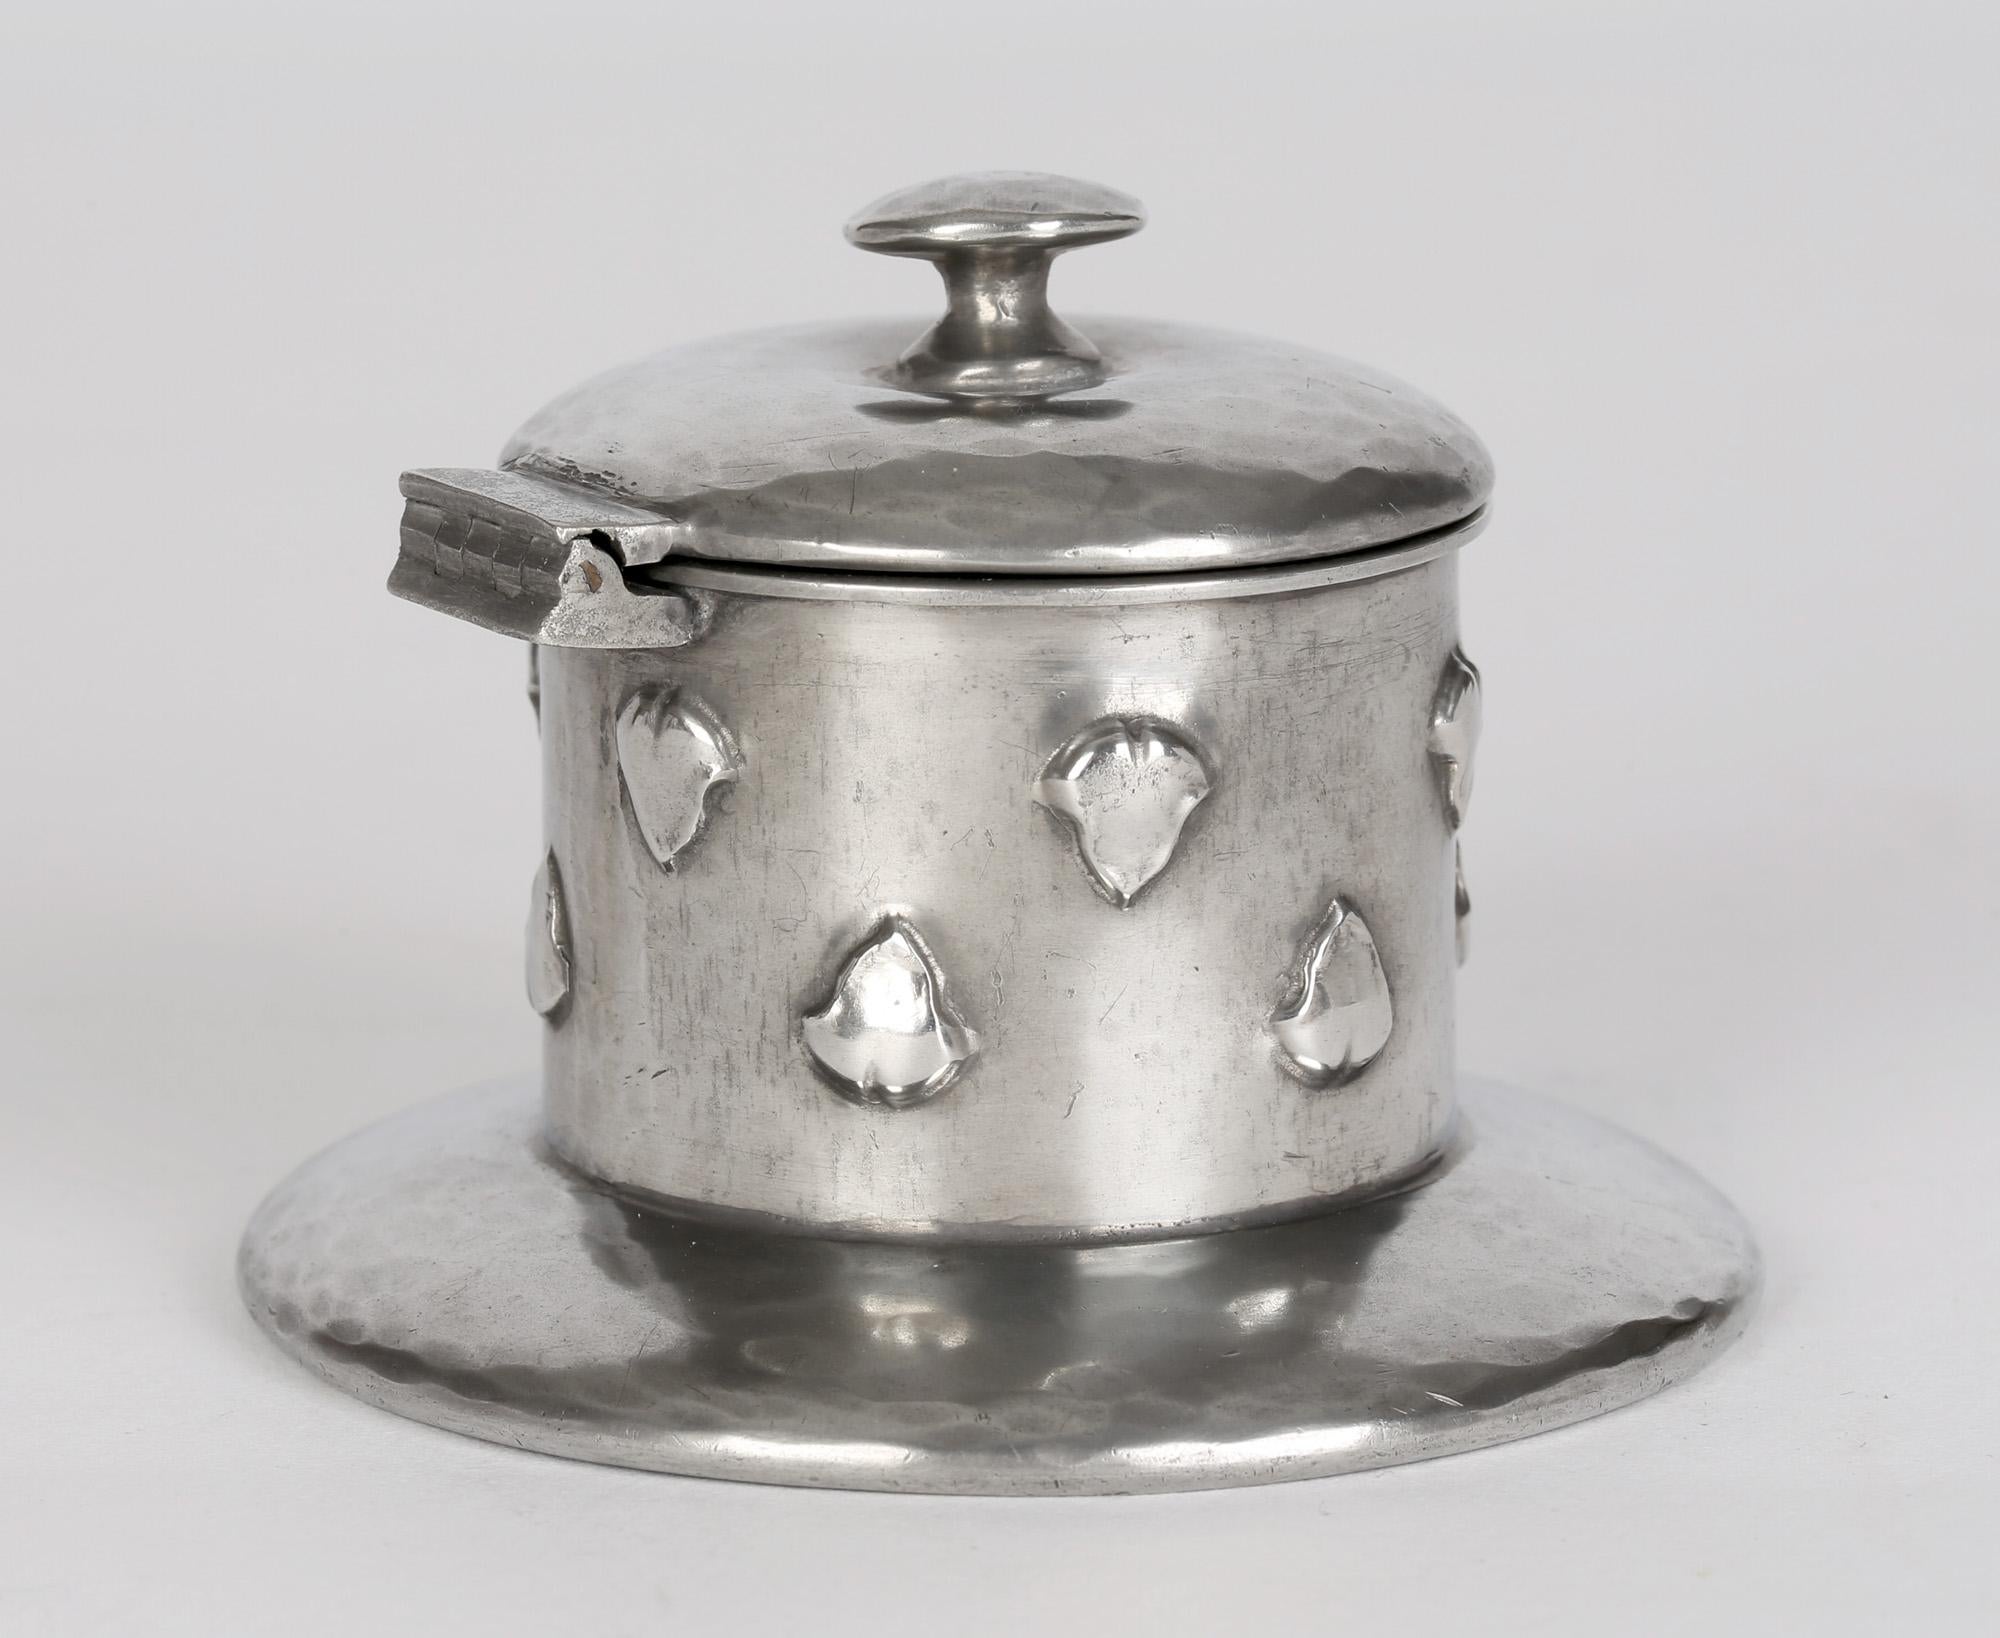 Stylish Art Nouveau Tudric planished pewter inkwell mad for Liberty & Co design attributed to Archibald Knox (Scottish, 1864-1933) and dating from around 1905. The inkwell stands raised on a wide rounded base with a cylindrical body with small